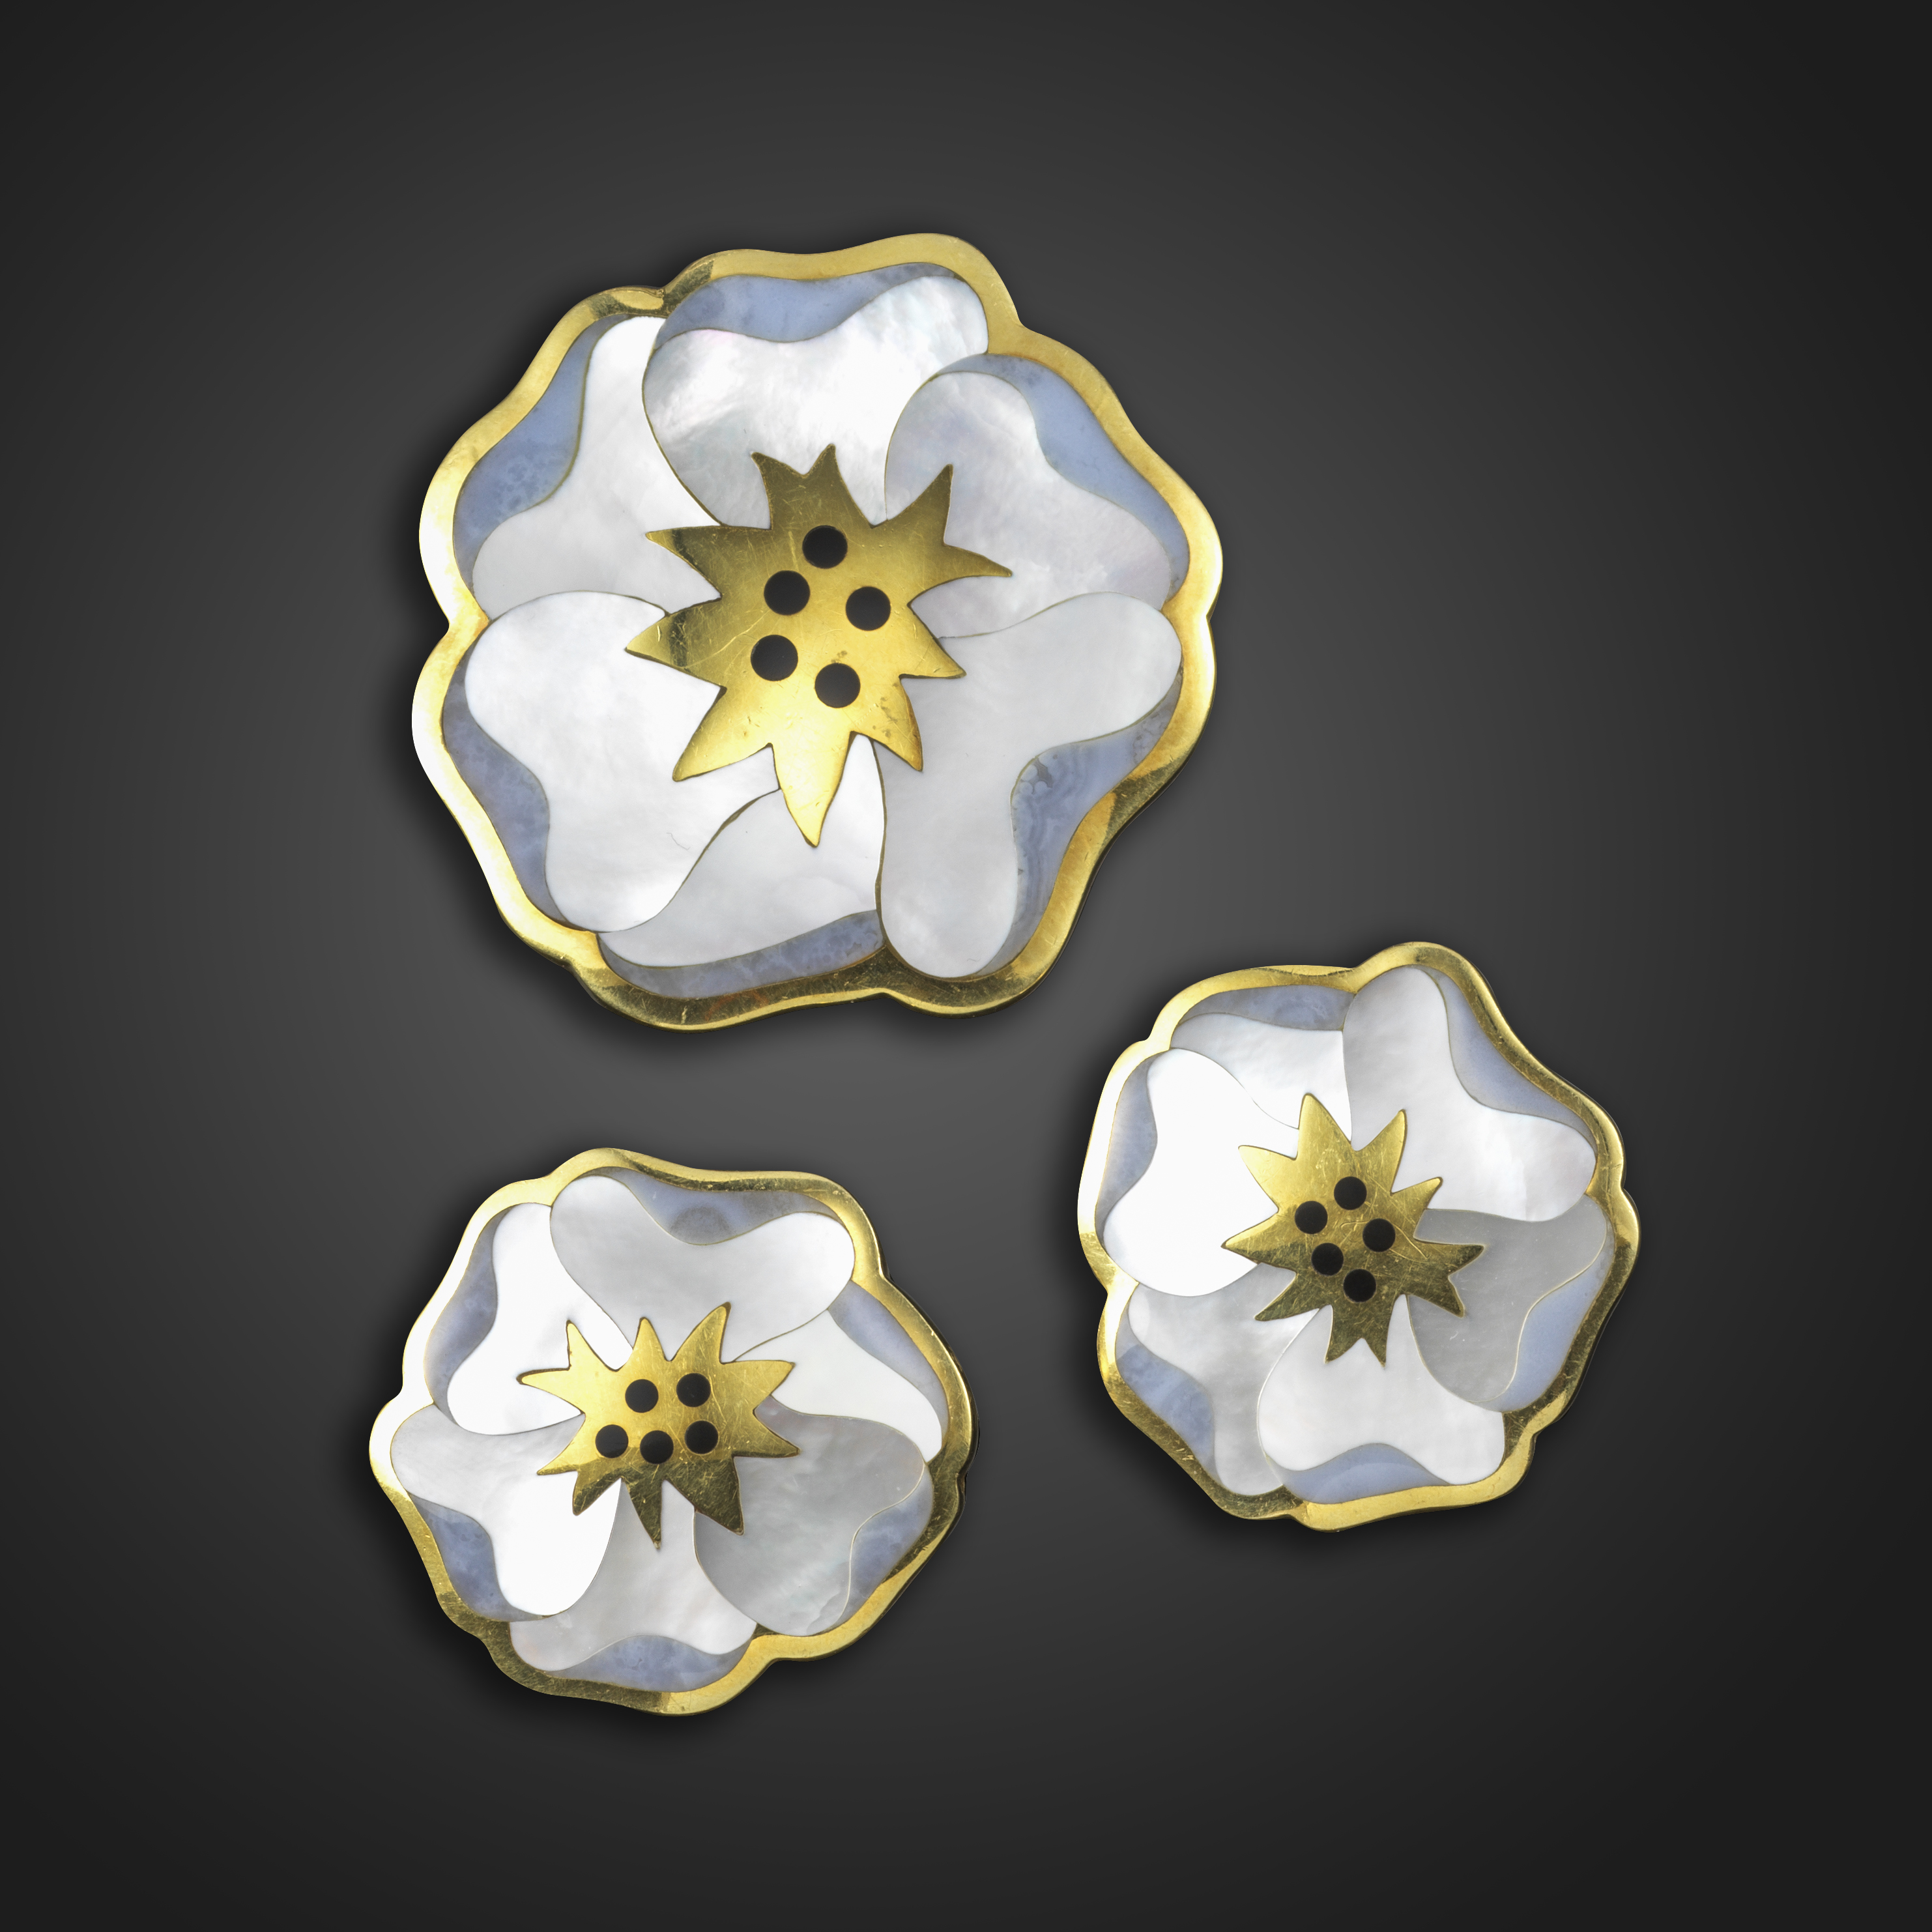 A suite of gem-set gold pansy jewellery by Tiffany & Co., c.1980, comprising a brooch and a pair